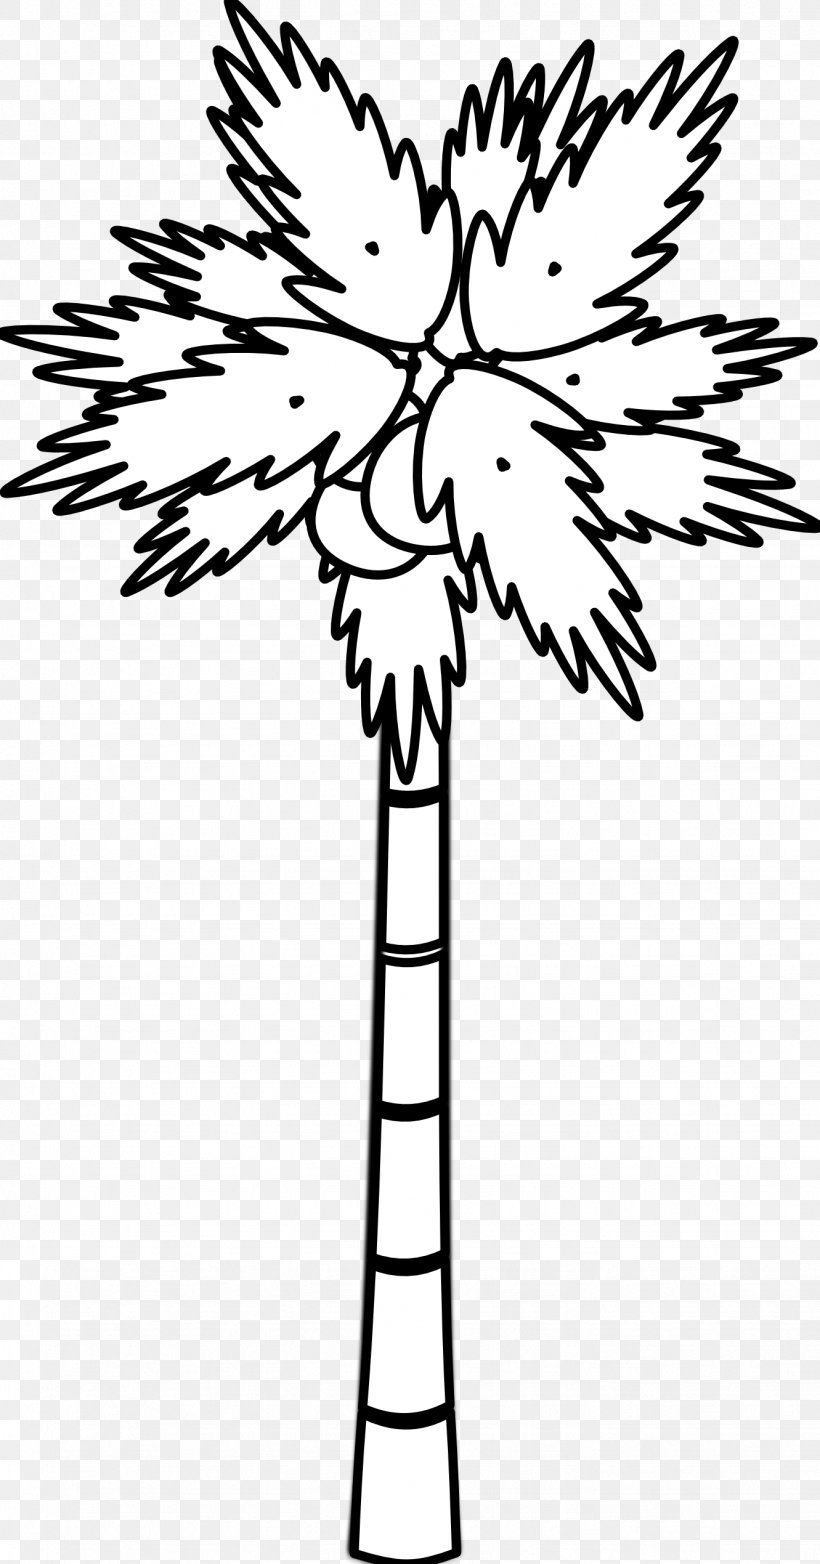 Coconut Tree Arecaceae Clip Art, PNG, 1331x2539px, Coconut, Arecaceae, Black, Black And White, Branch Download Free